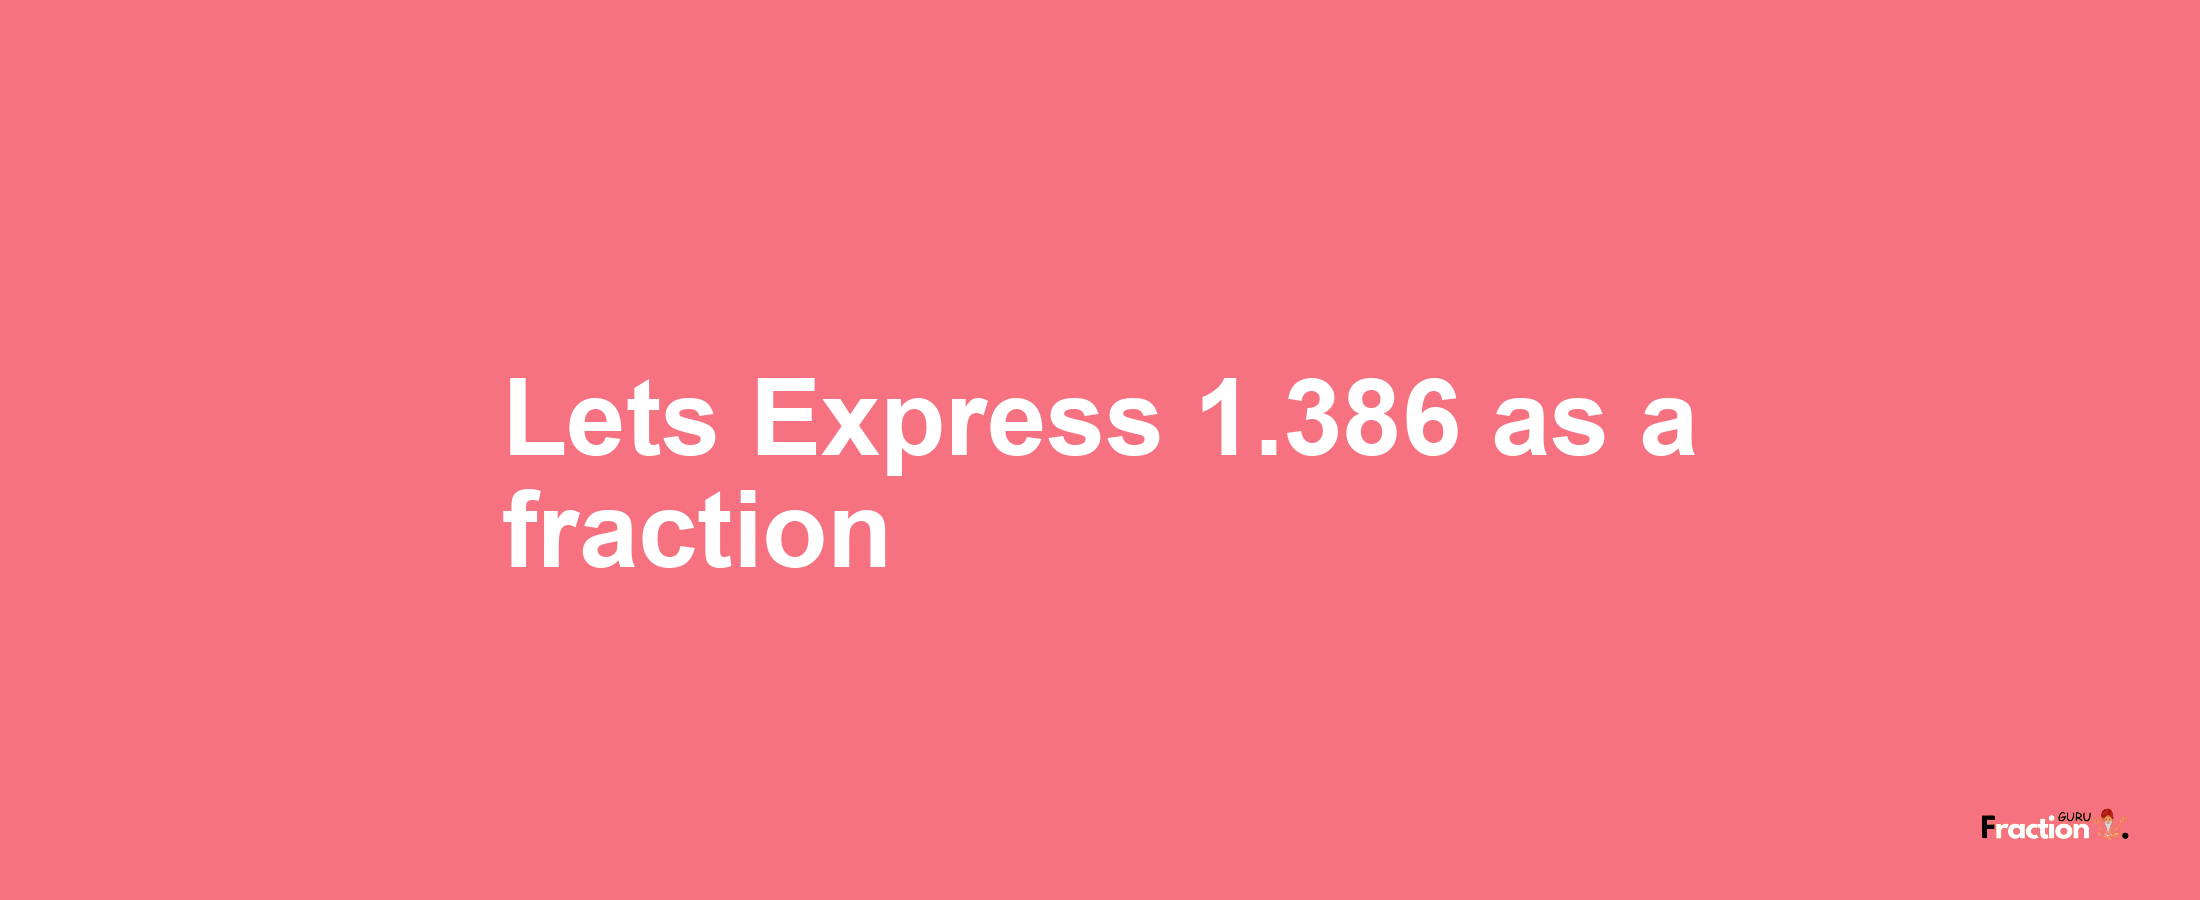 Lets Express 1.386 as afraction